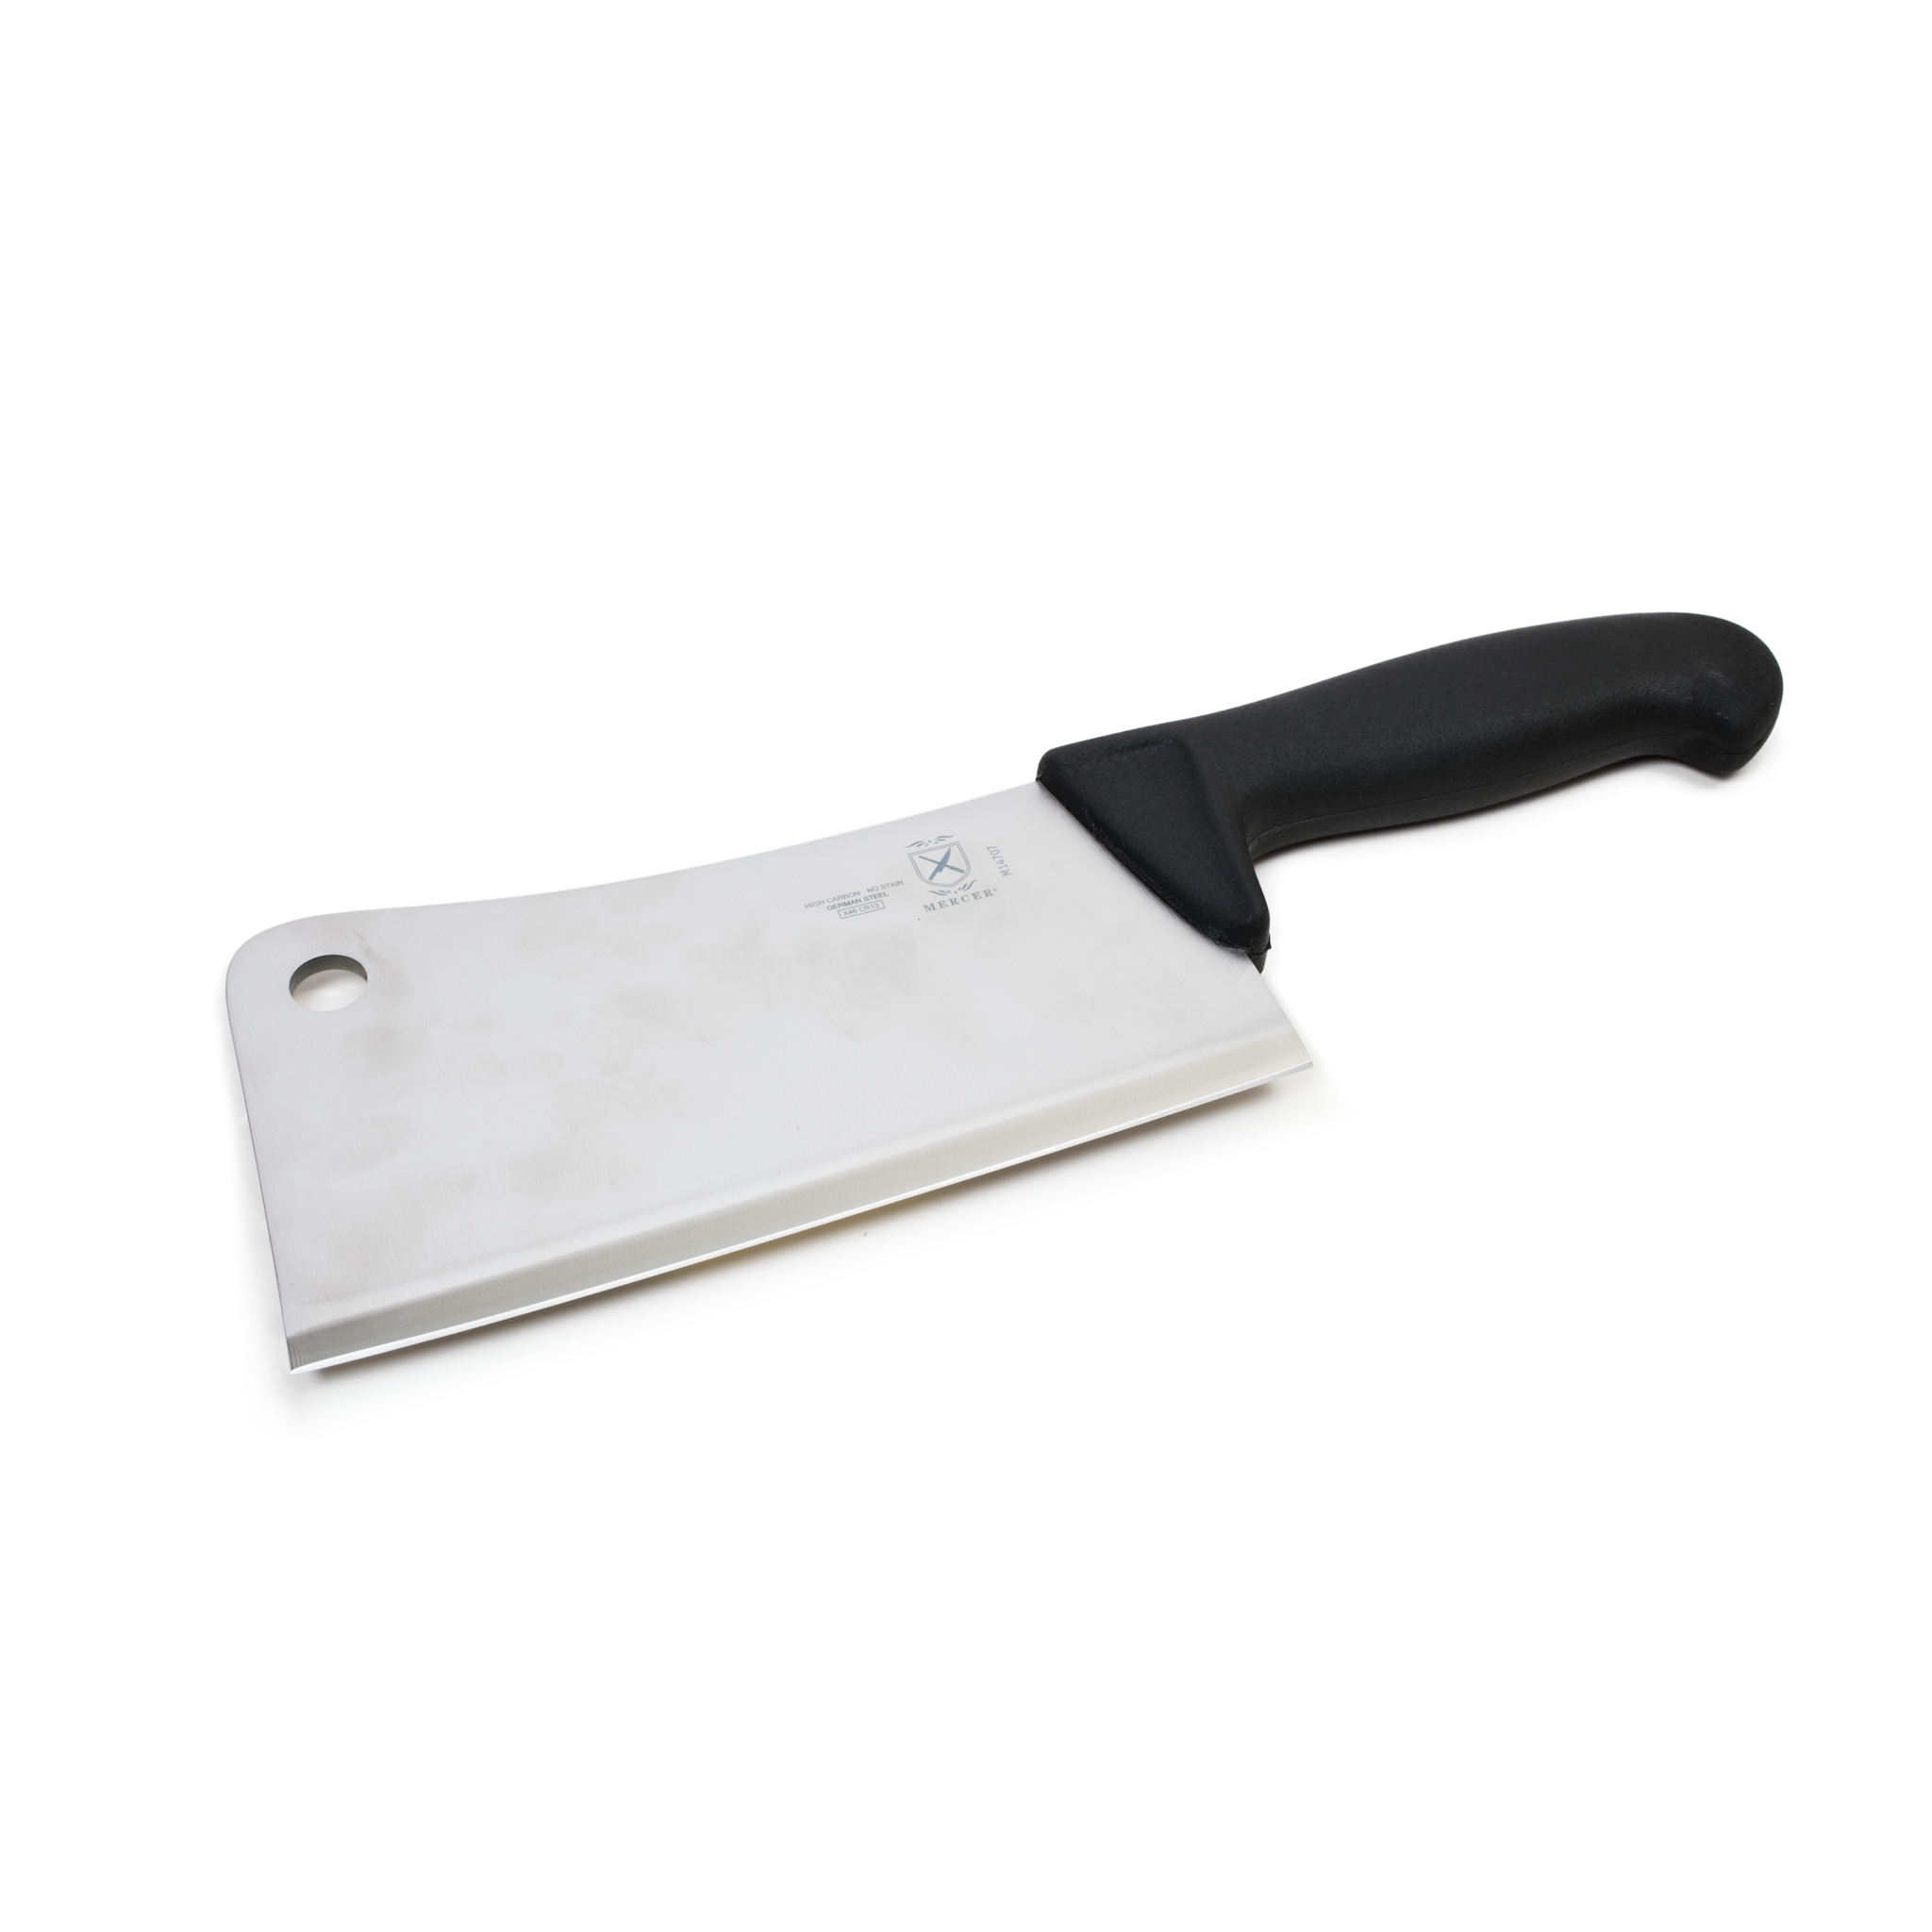 https://res.cloudinary.com/hksqkdlah/image/upload/37812_sil-cleaver-mercer-culinary-7in-kitchen-cleaver-m14707.png